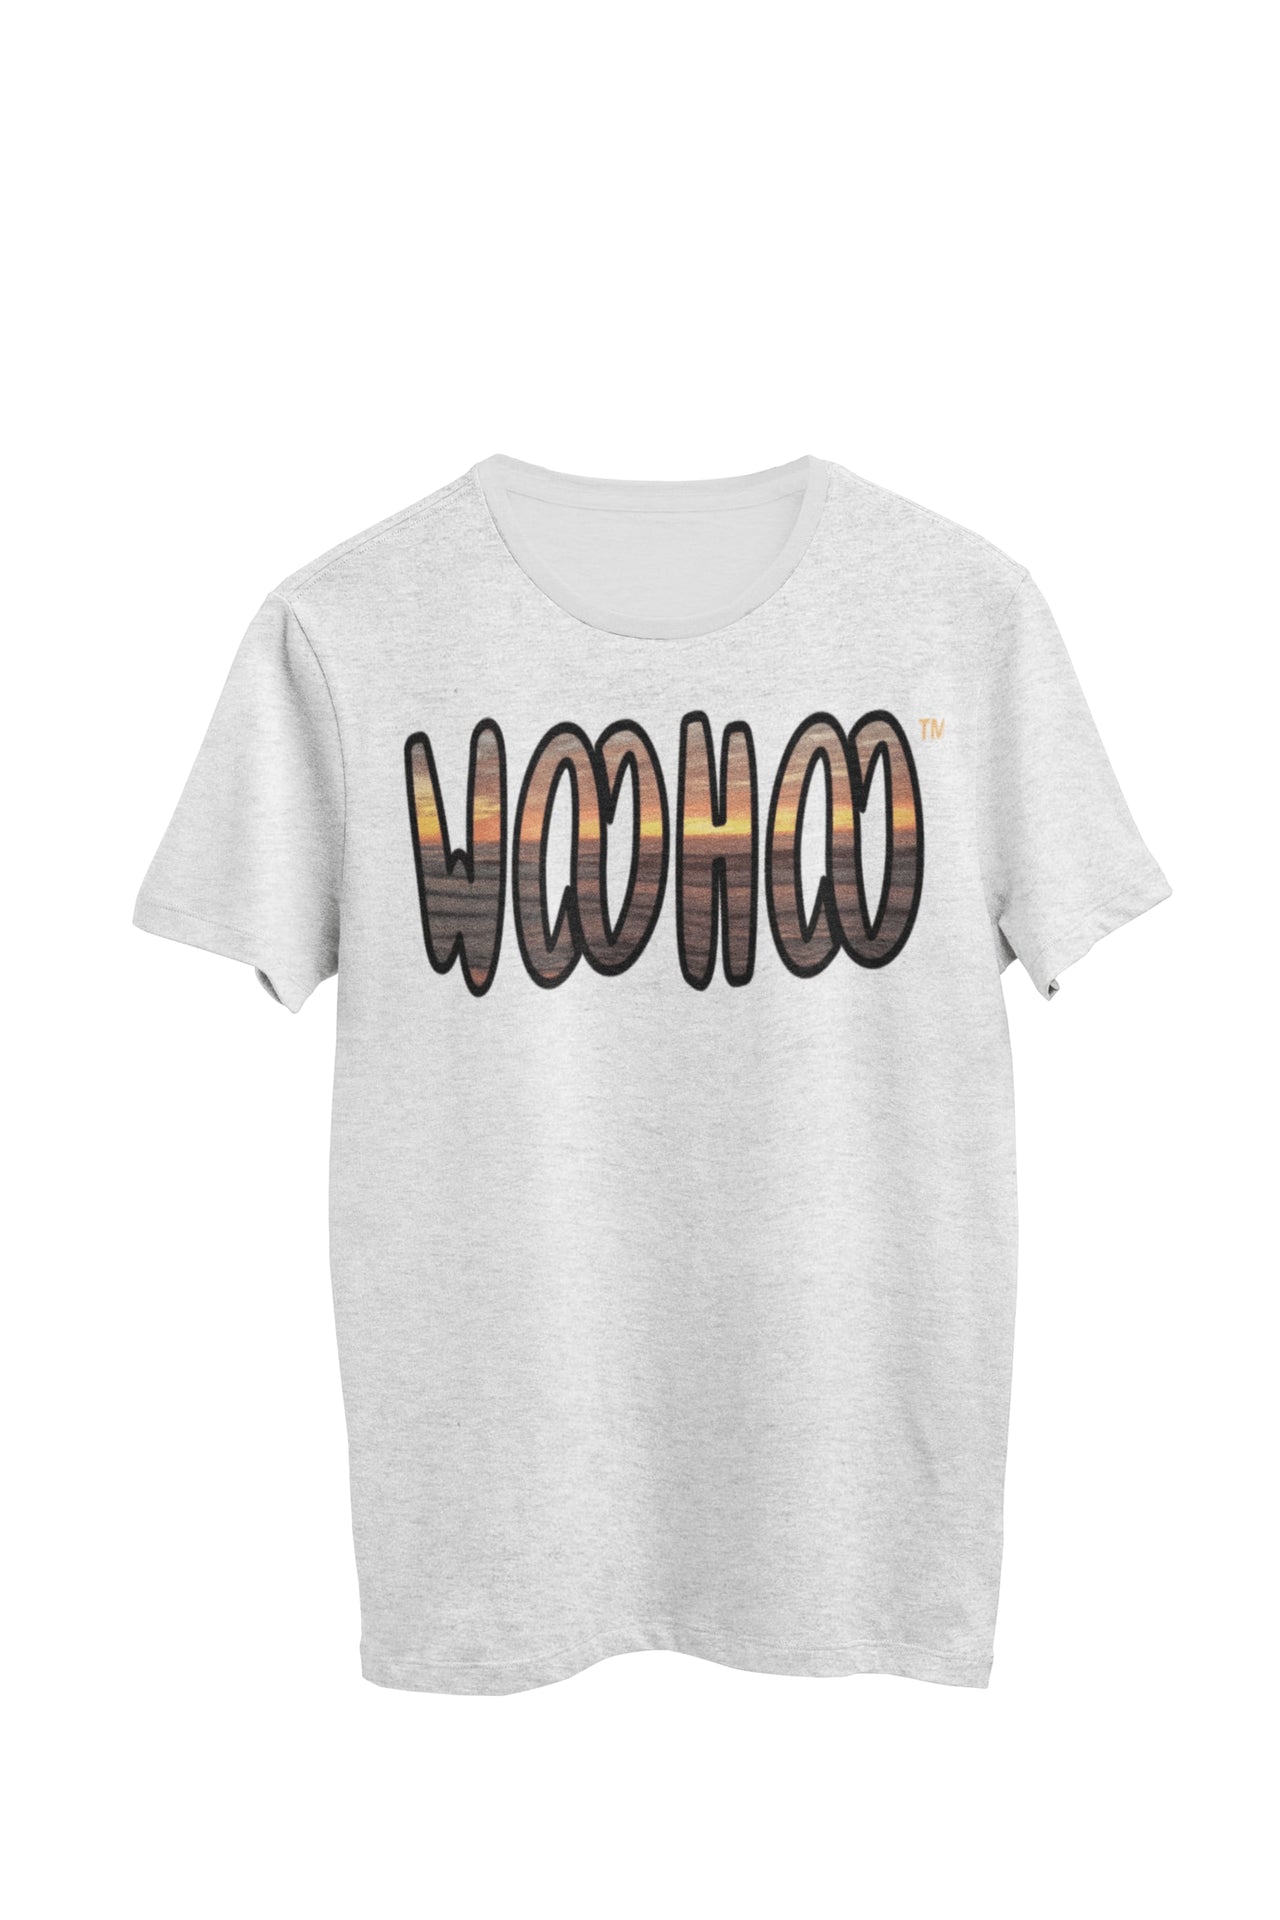 Heather gray unisex t-shirt designed by WooHoo Apparel. The design features a larger 'woohoo' font with a photo of the sunset look inside the outline.